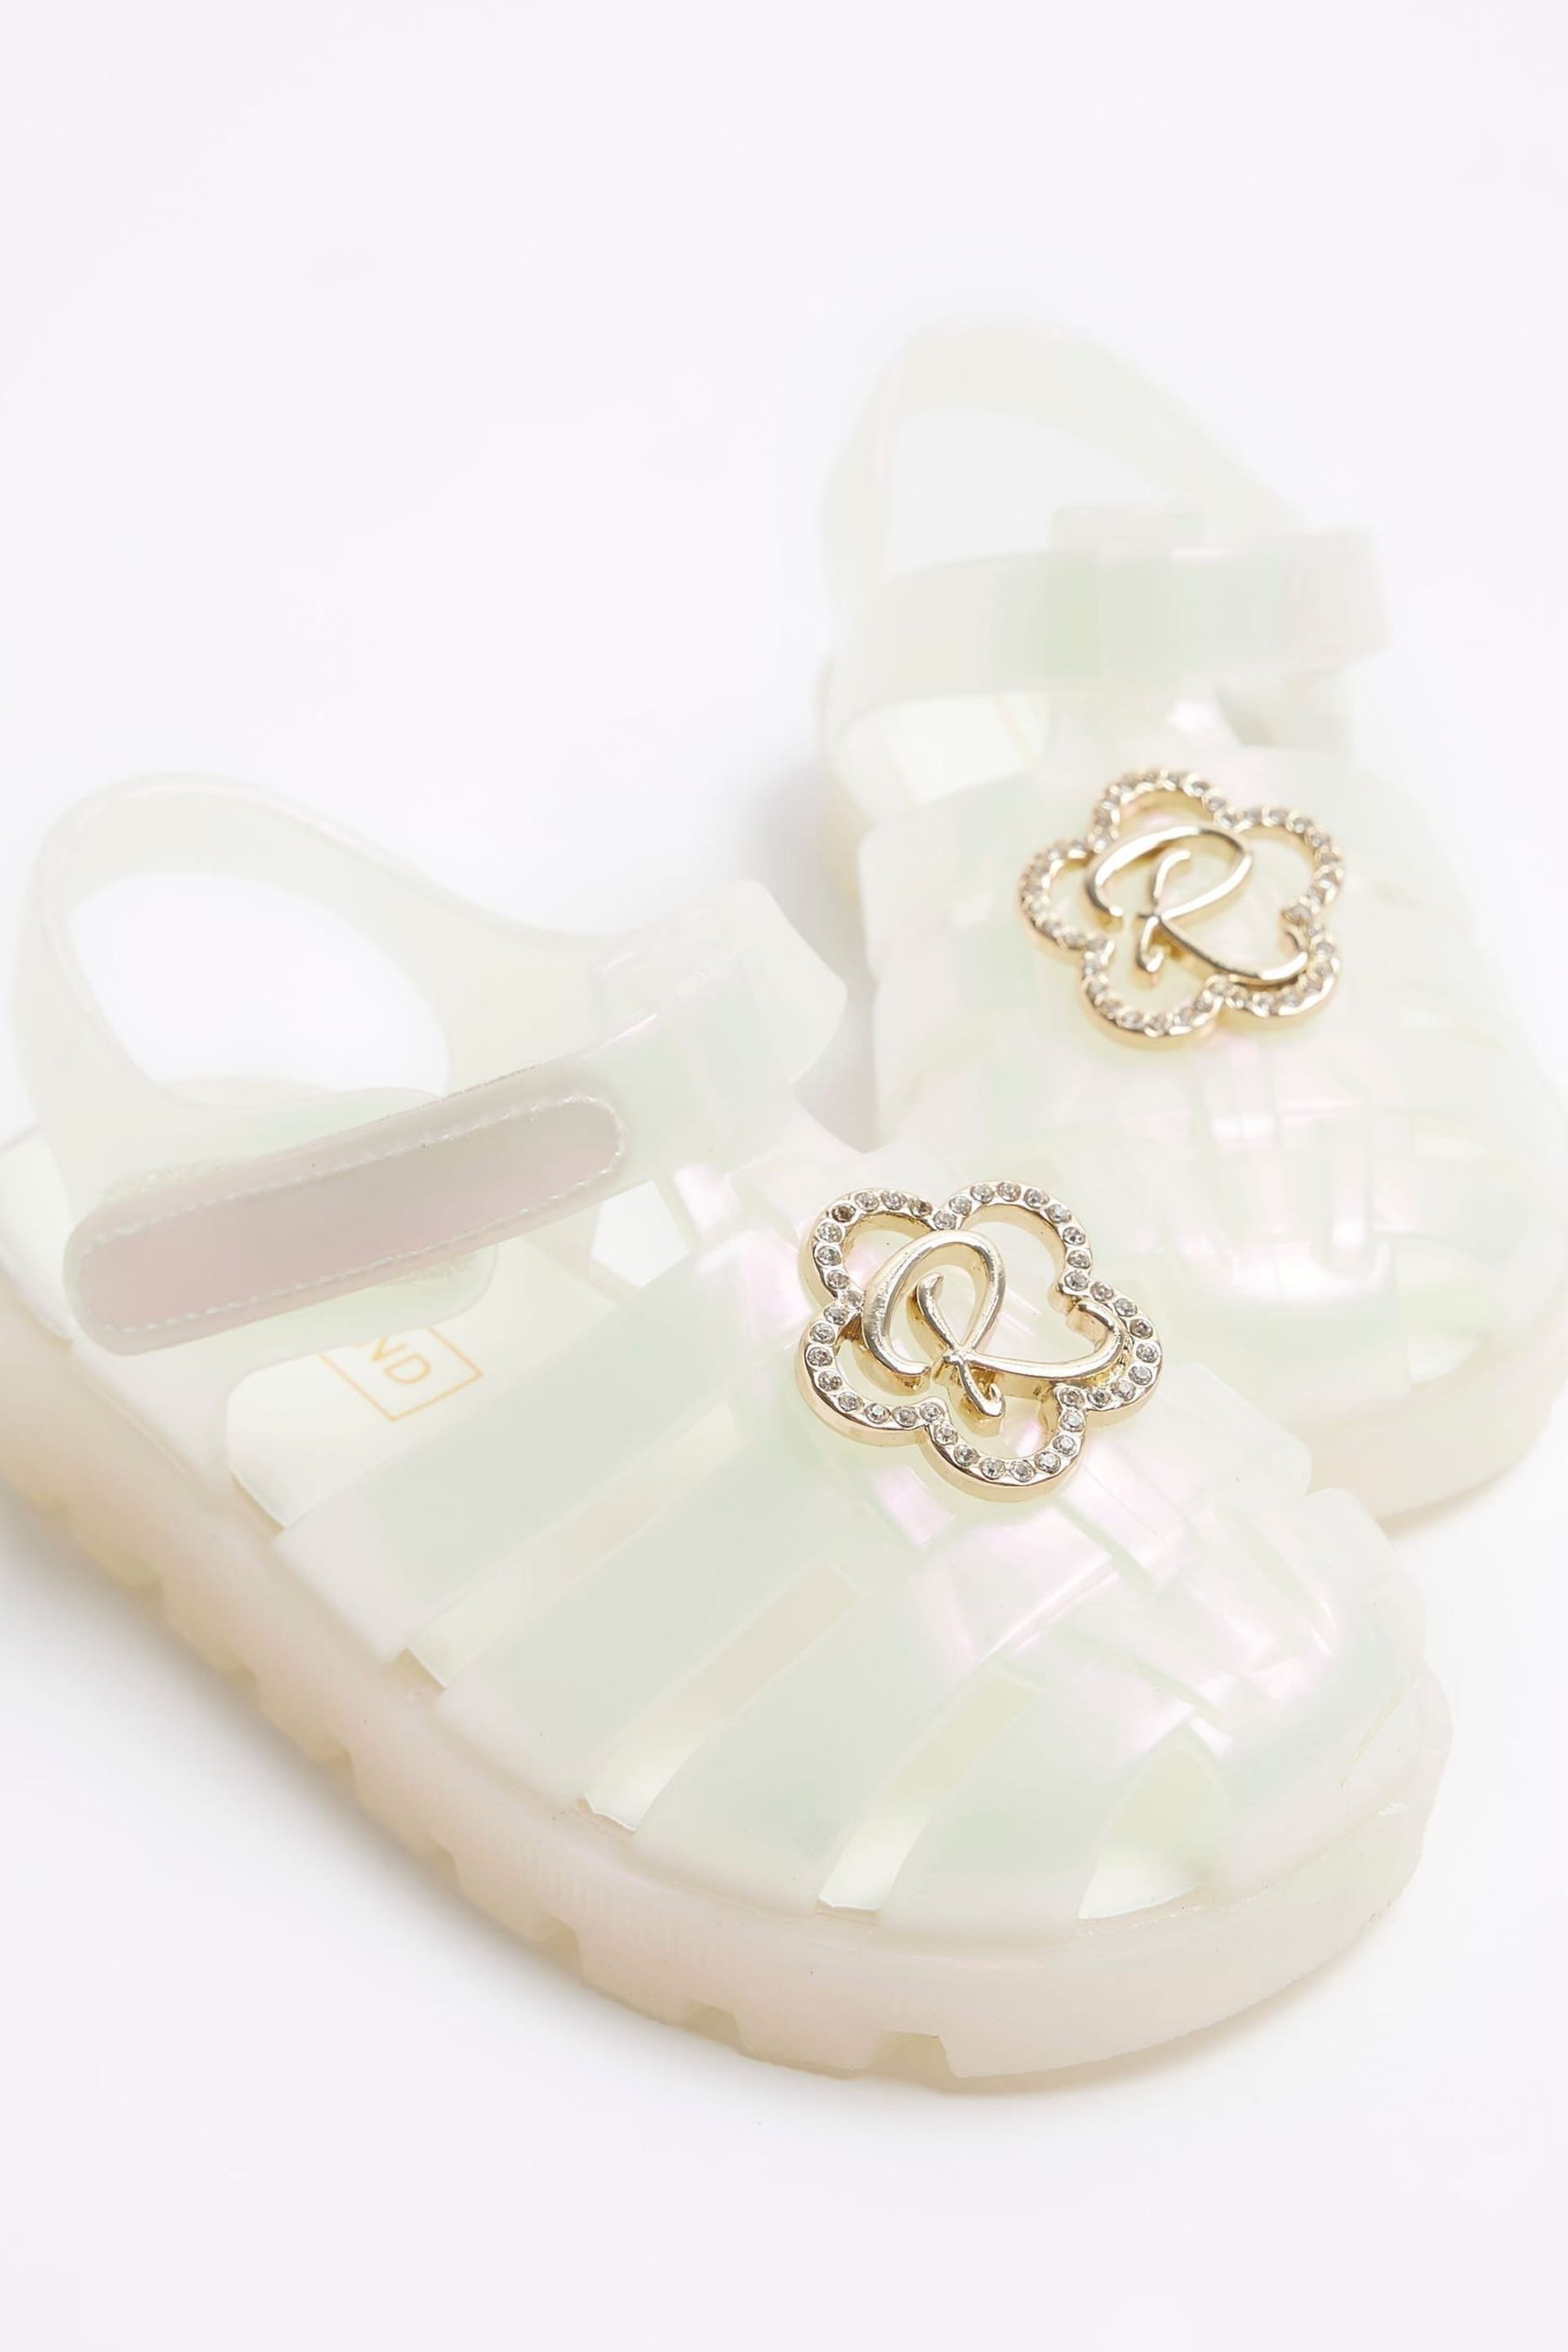 River Island White Girls Pearl Flower Jelly Sandals - Image 3 of 4